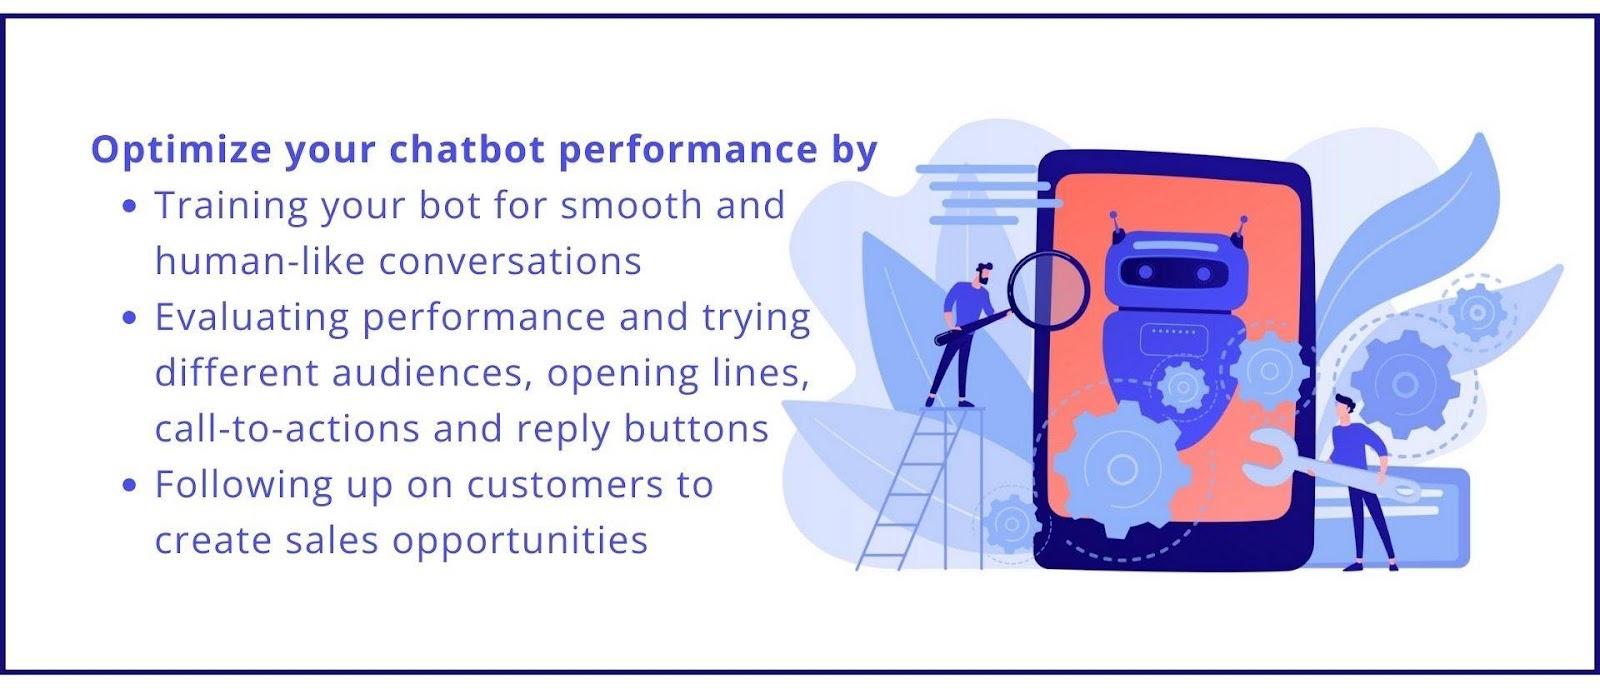 Chatbots can help you streamline your customer conversations and improve conversions.